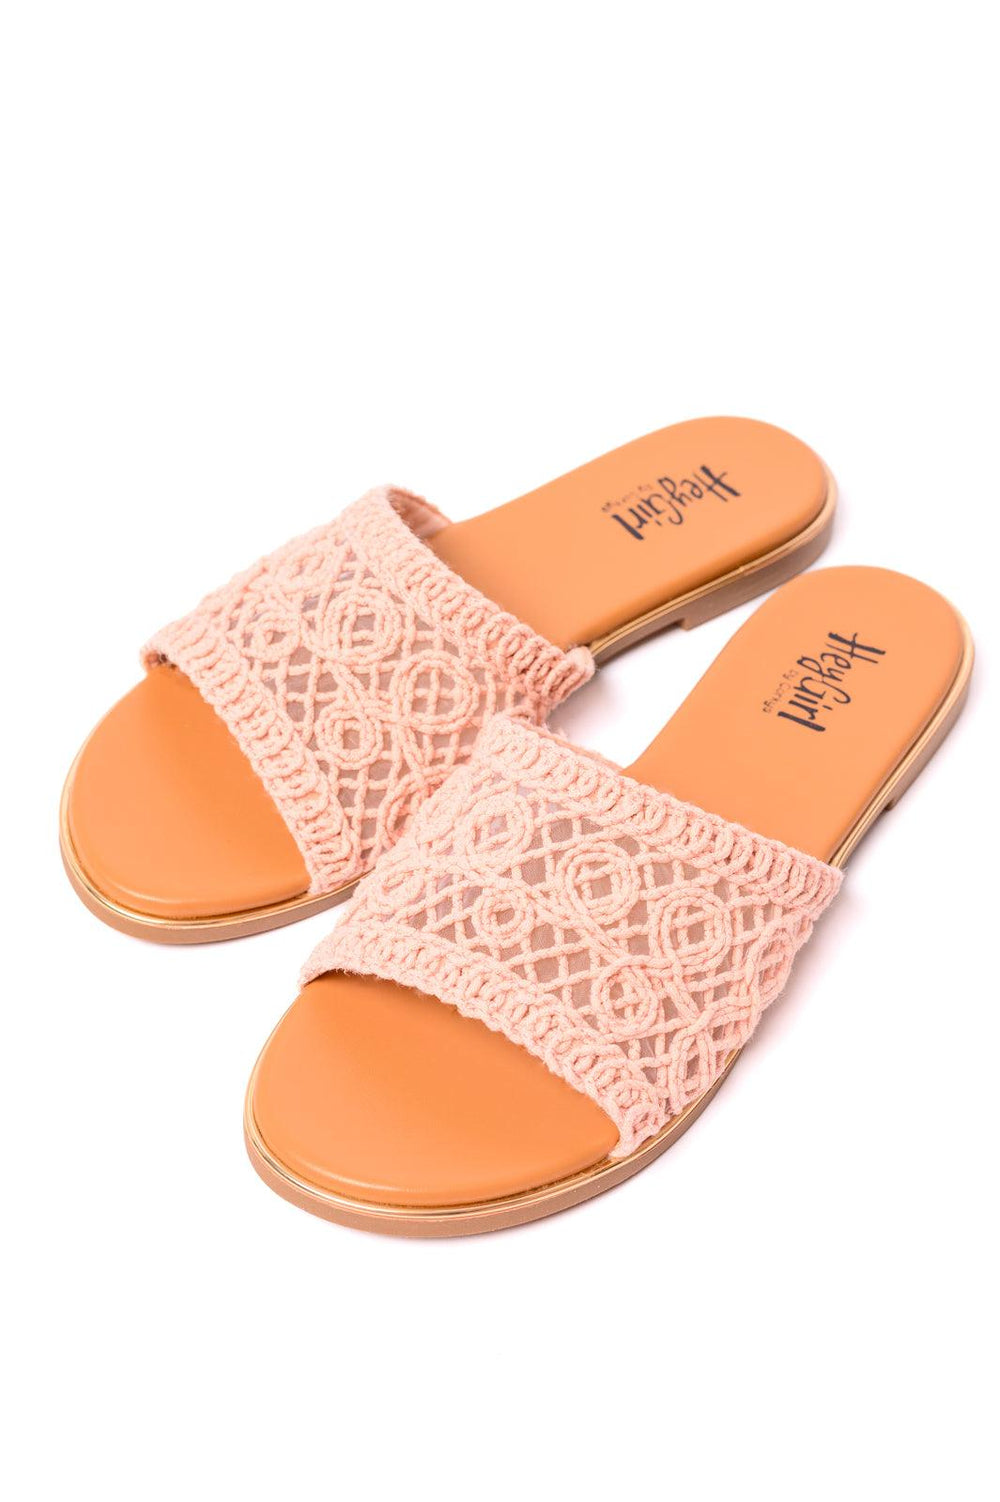 Hey Beach Sandals in Pink Shoes